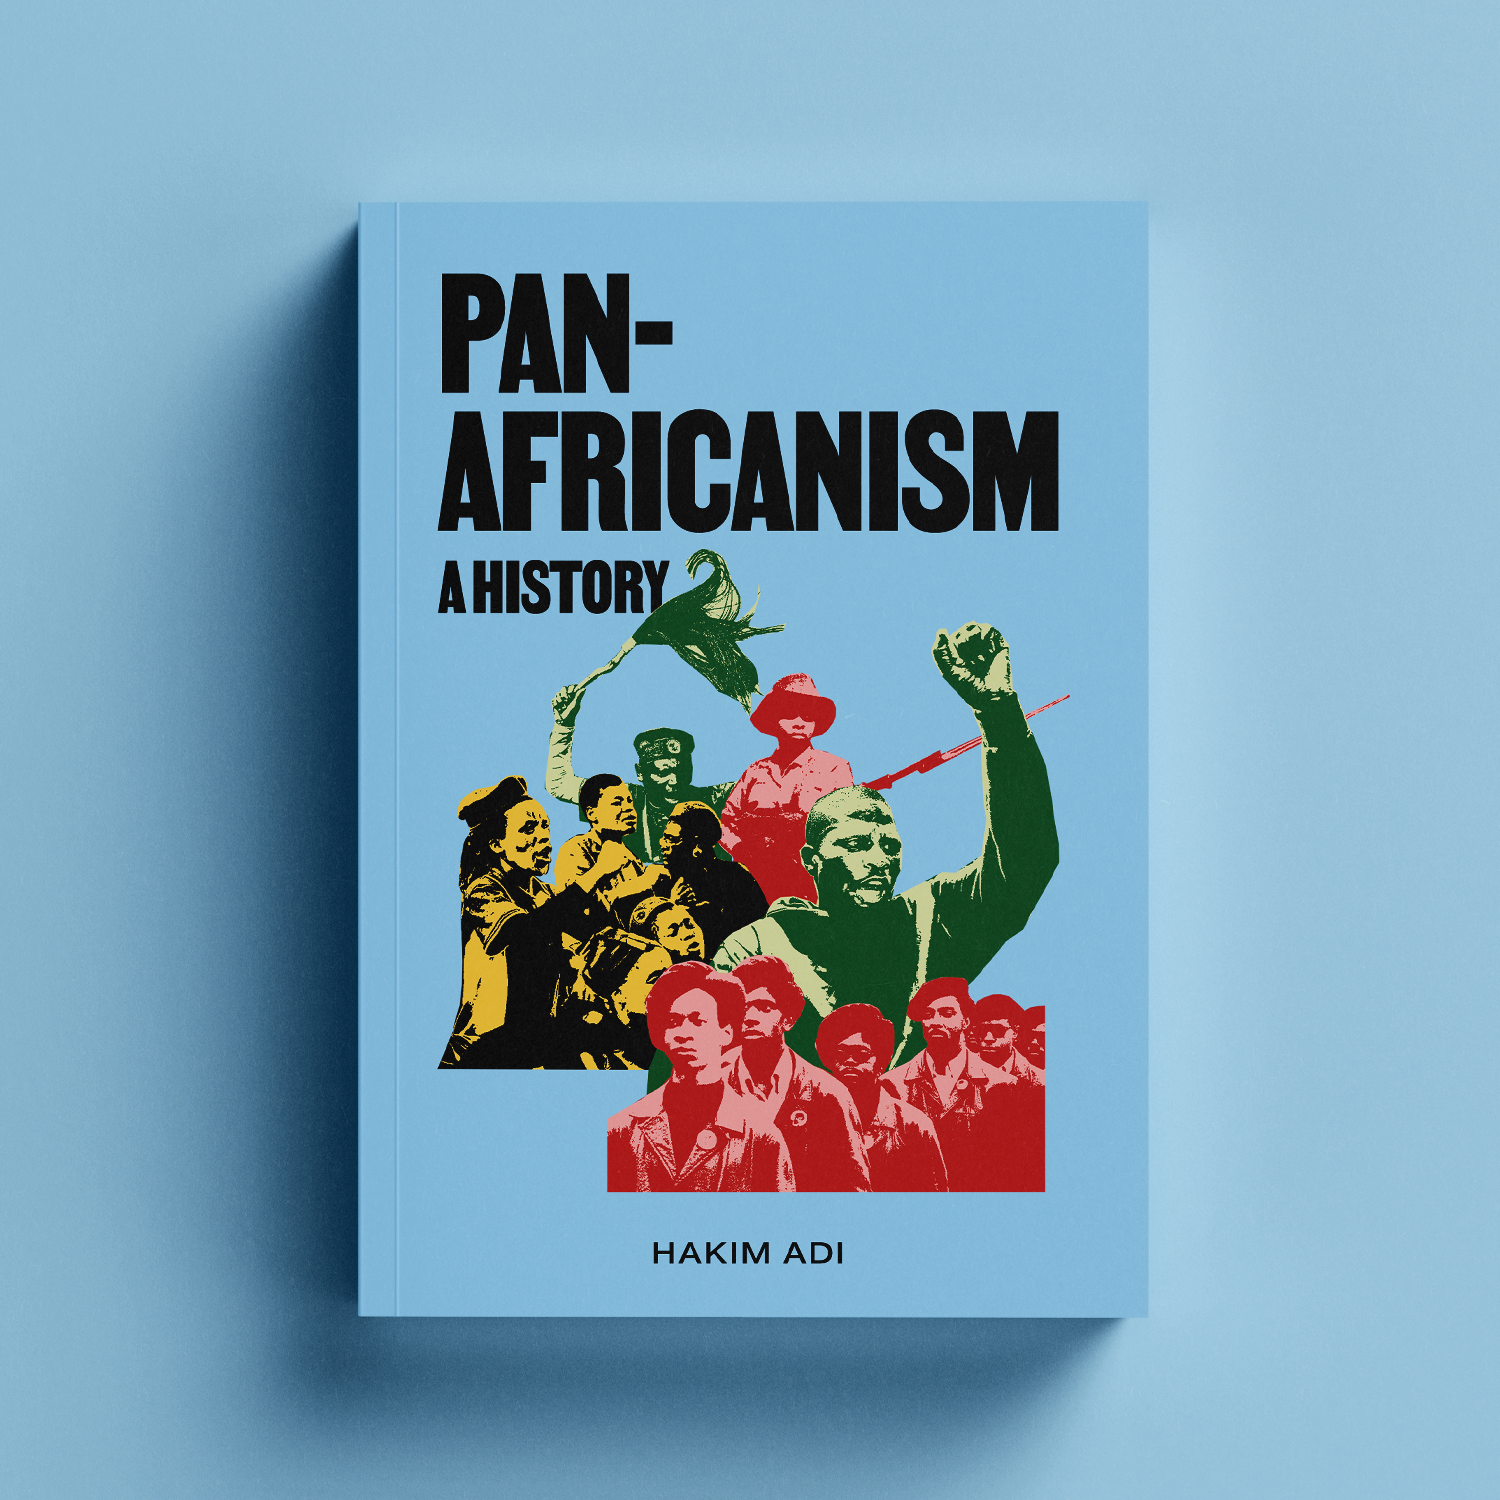 Pan-Africanism: A History